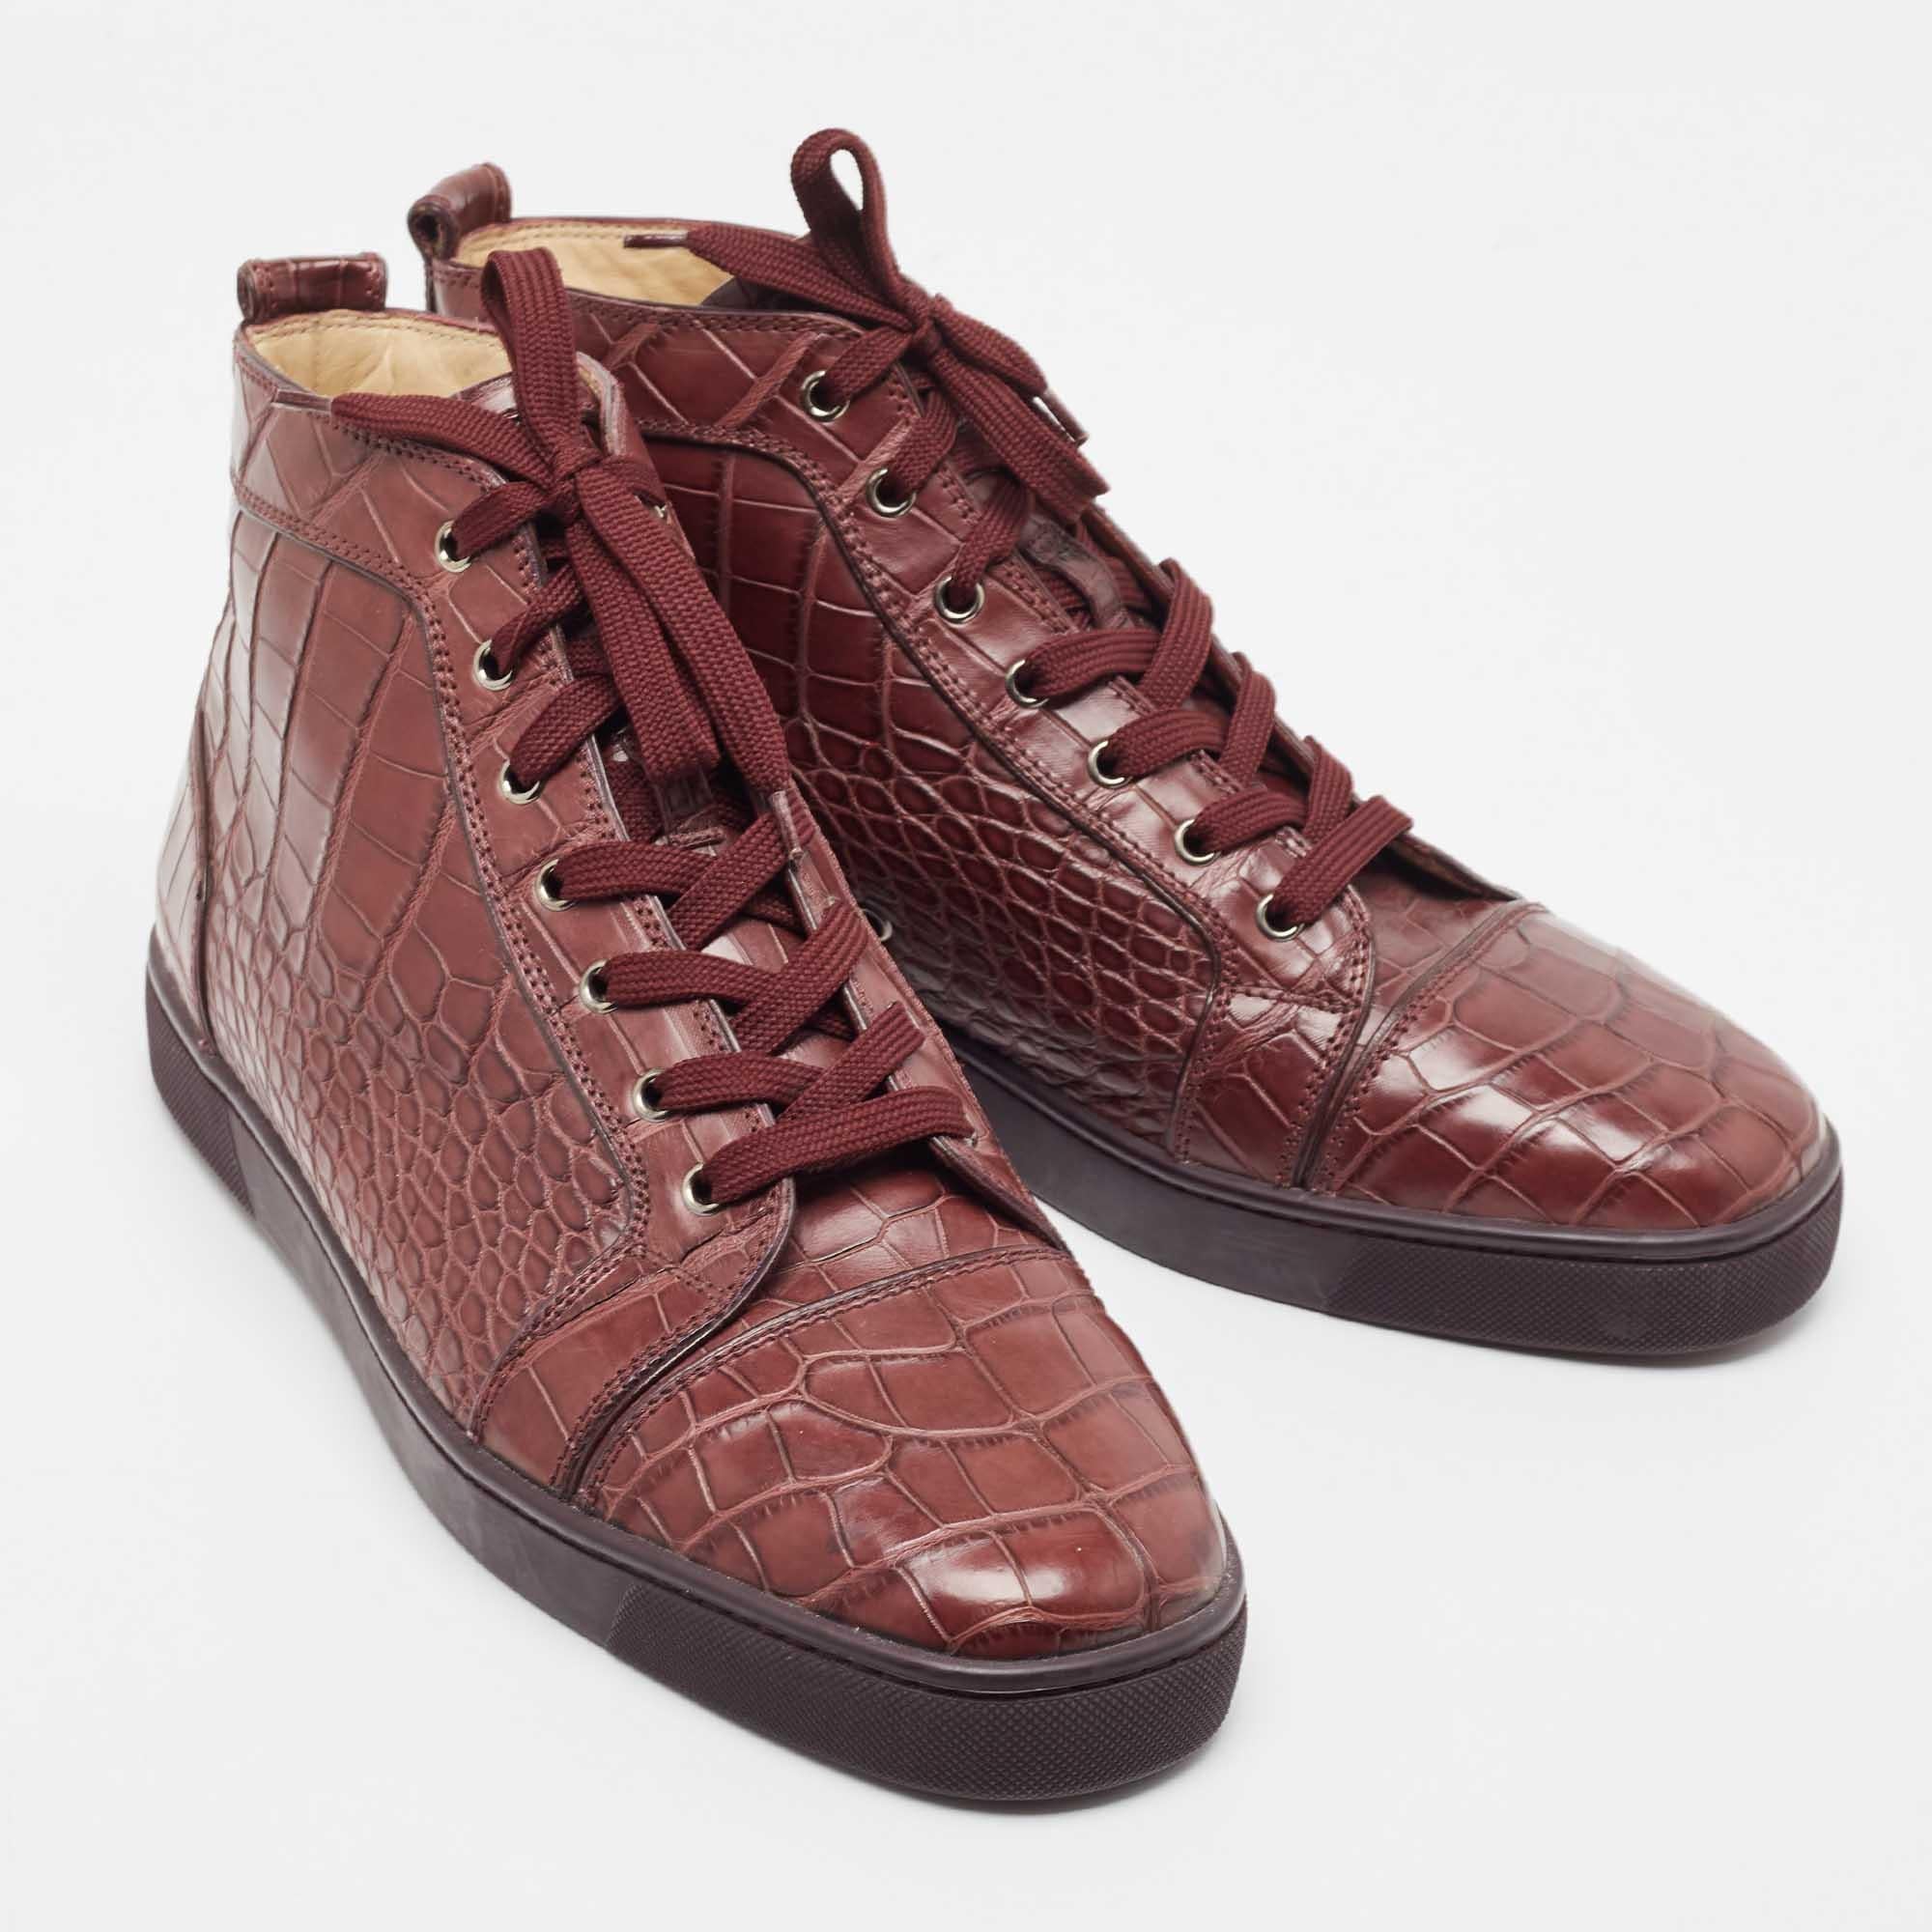 Christian Louboutin Burgundy Crocodile Leather Louis High Top Sneakers Size 46 In New Condition For Sale In Dubai, Al Qouz 2